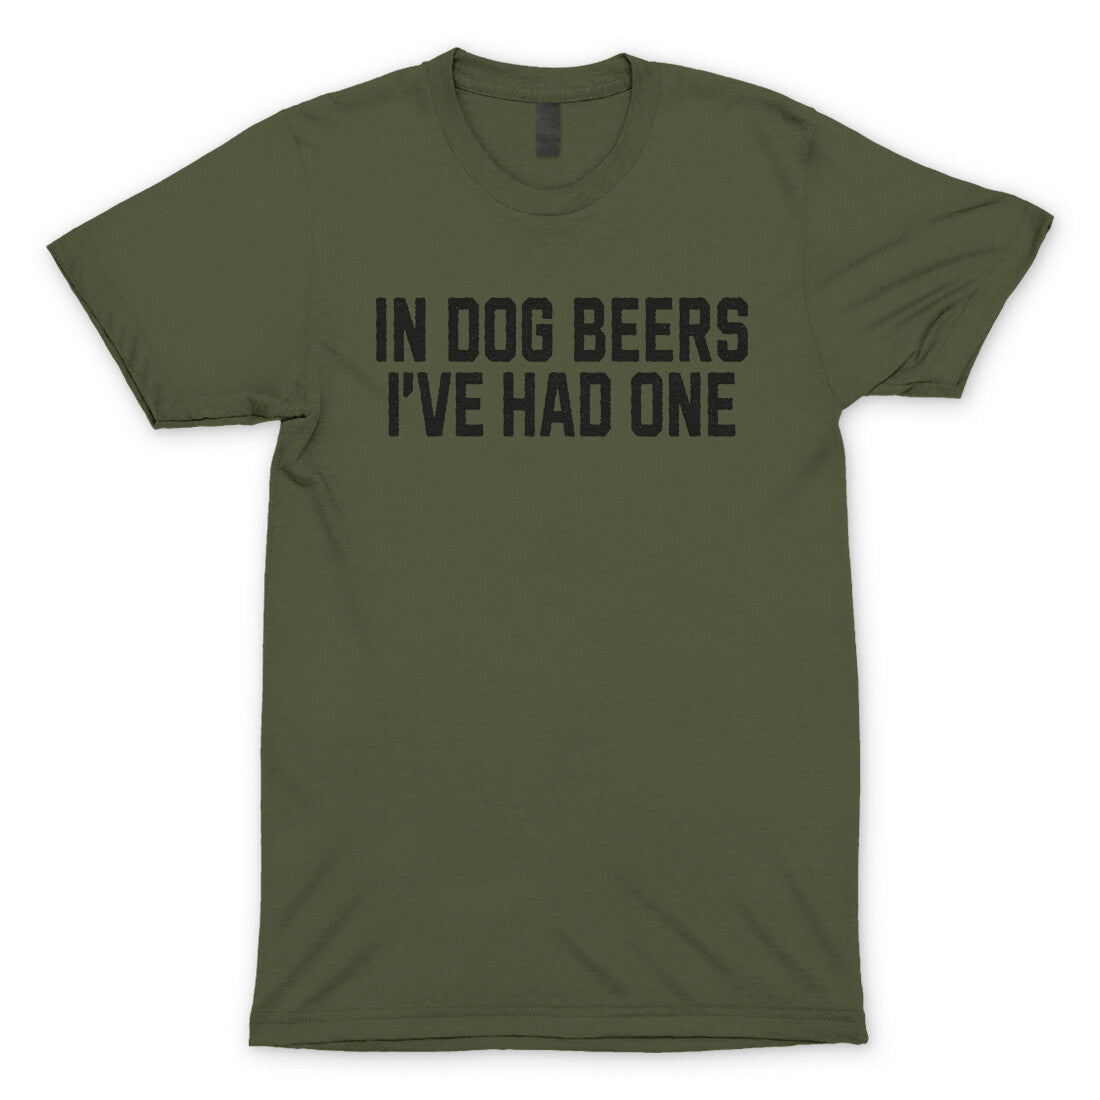 In Dog Beers I've Had One in Military Green Color